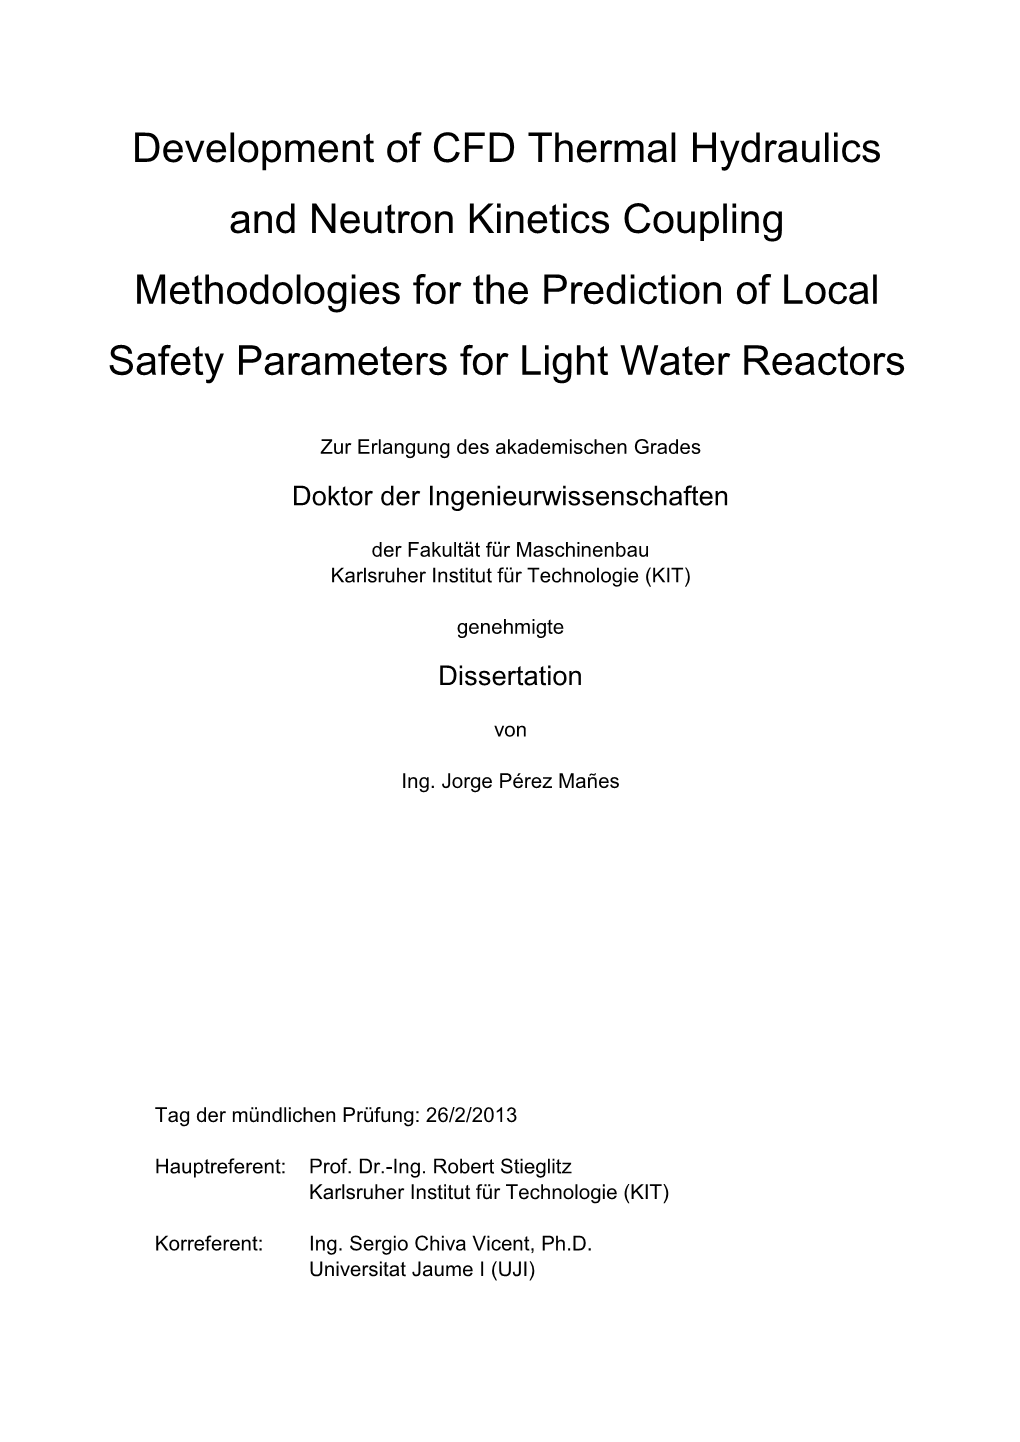 Development of CFD Thermal Hydraulics and Neutron Kinetics Coupling Methodologies for the Prediction of Local Safety Parameters for Light Water Reactors